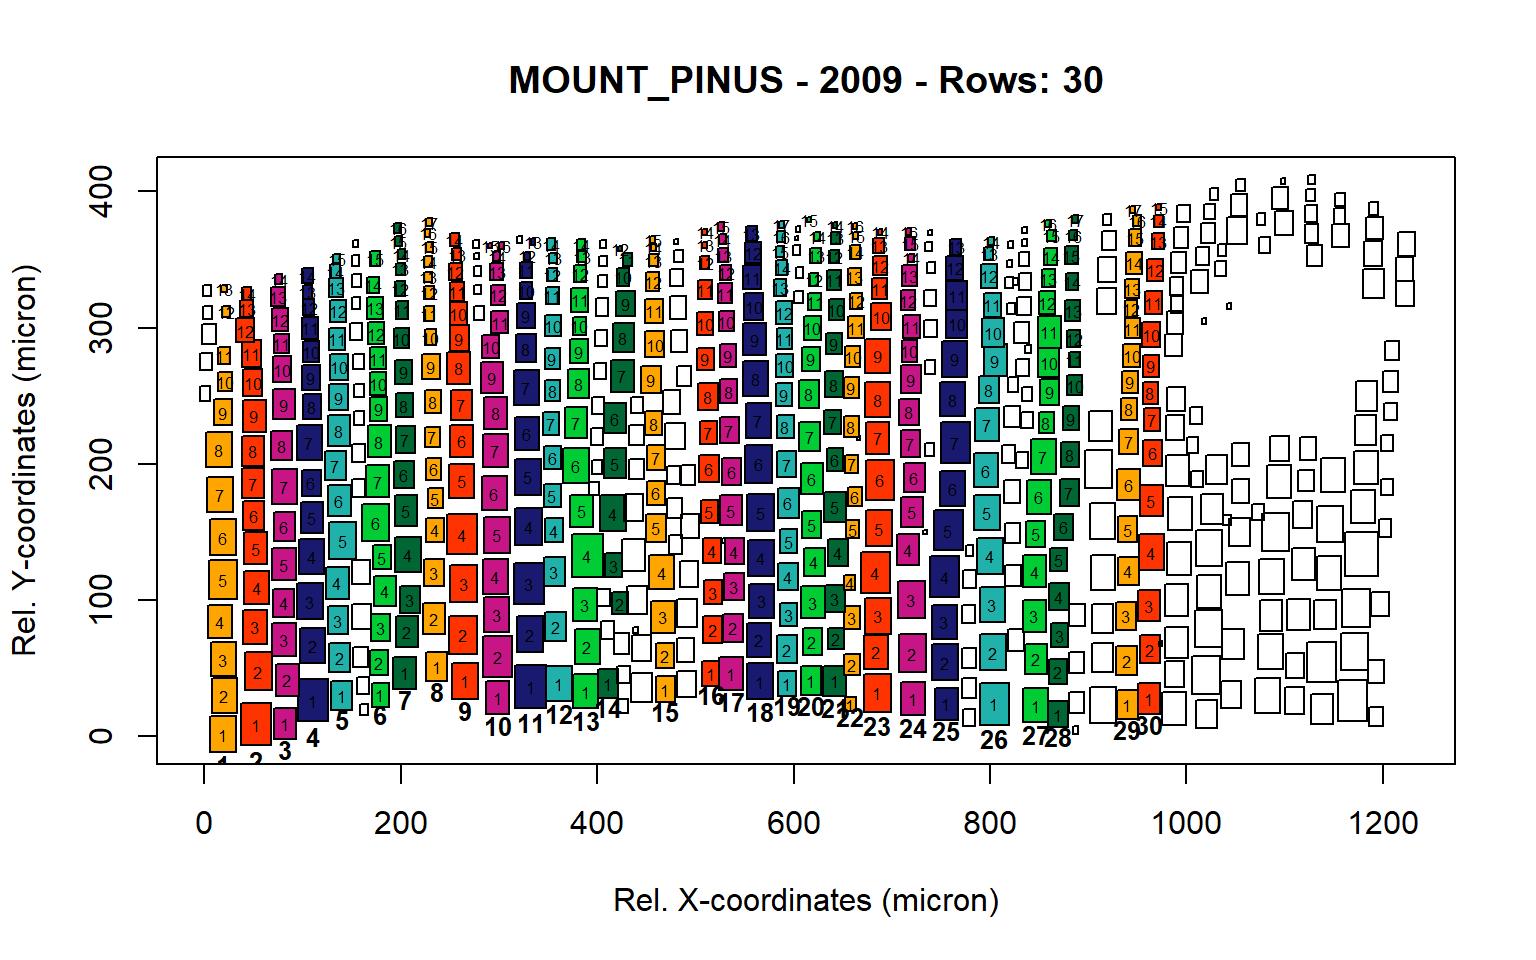 Standard plots generated by the write.output() function for mountain Pinus cembra (species="MOUNT_PINUS"), including 2007, 2008, 2009 and 2010.